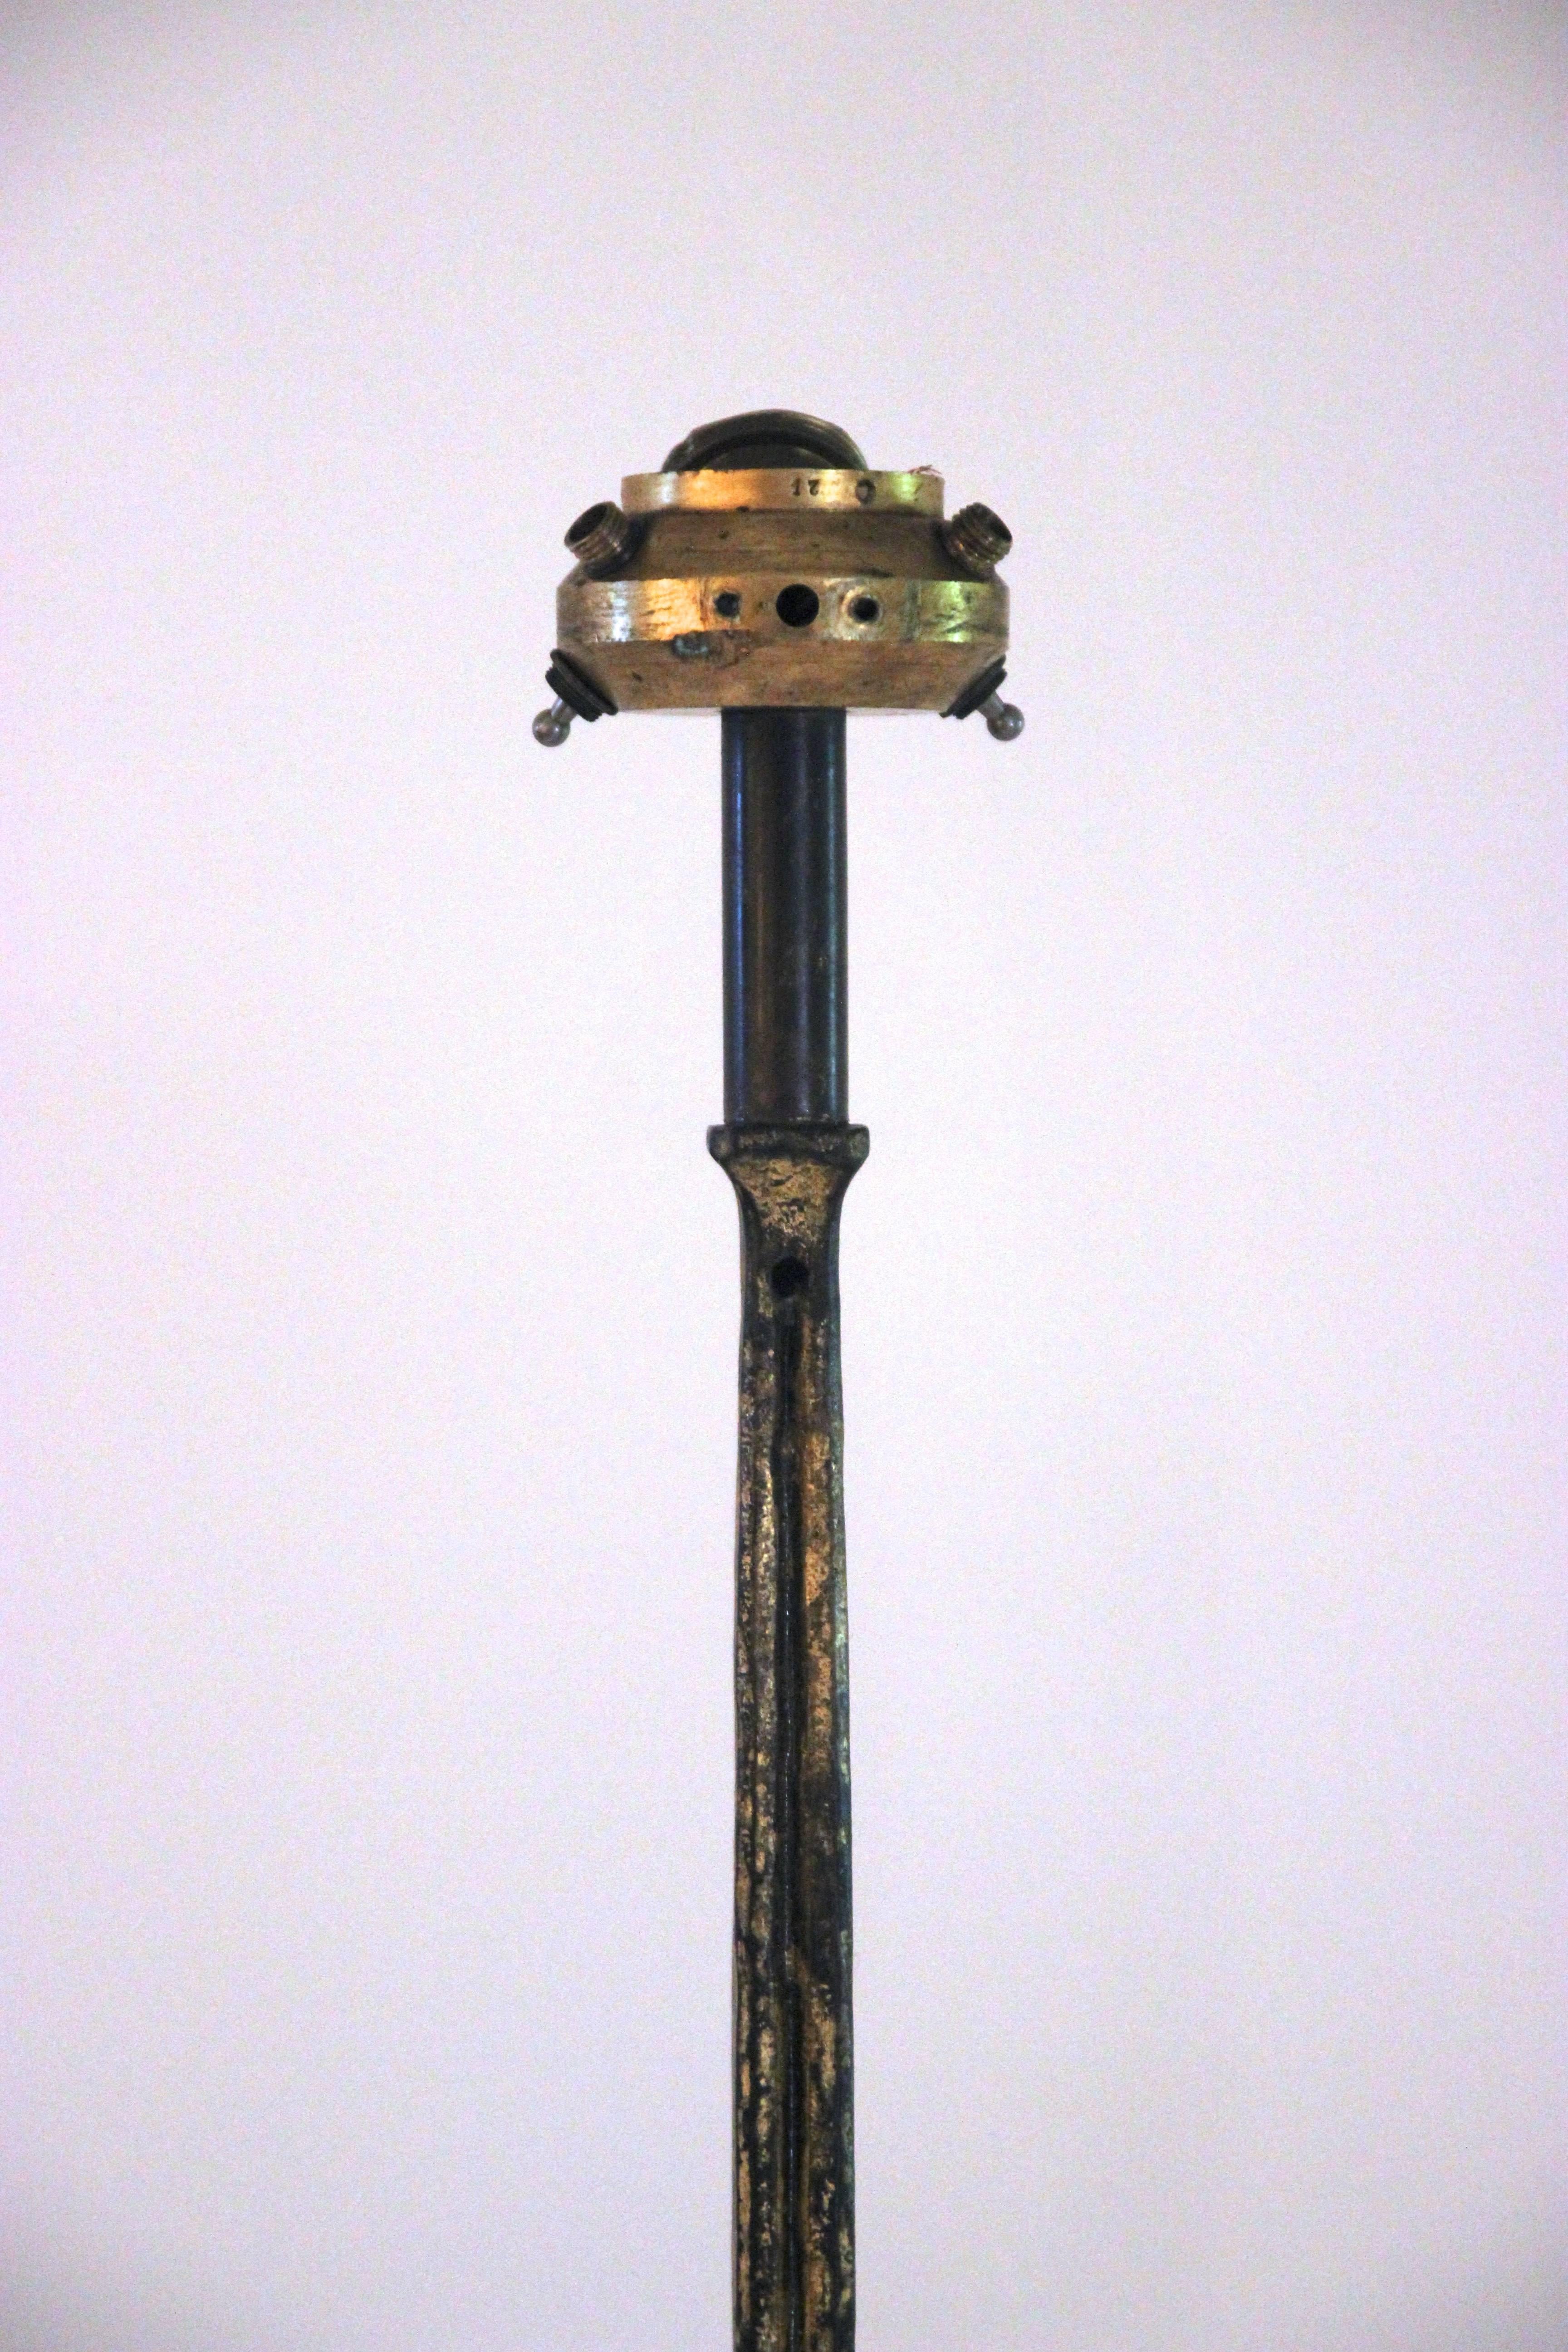 Ramsay floor lamp, 
iron gilded, signed MALABER manufacturer,
circa 1970, France.
Measures: Height 1m55, diameter 40 cm.
  